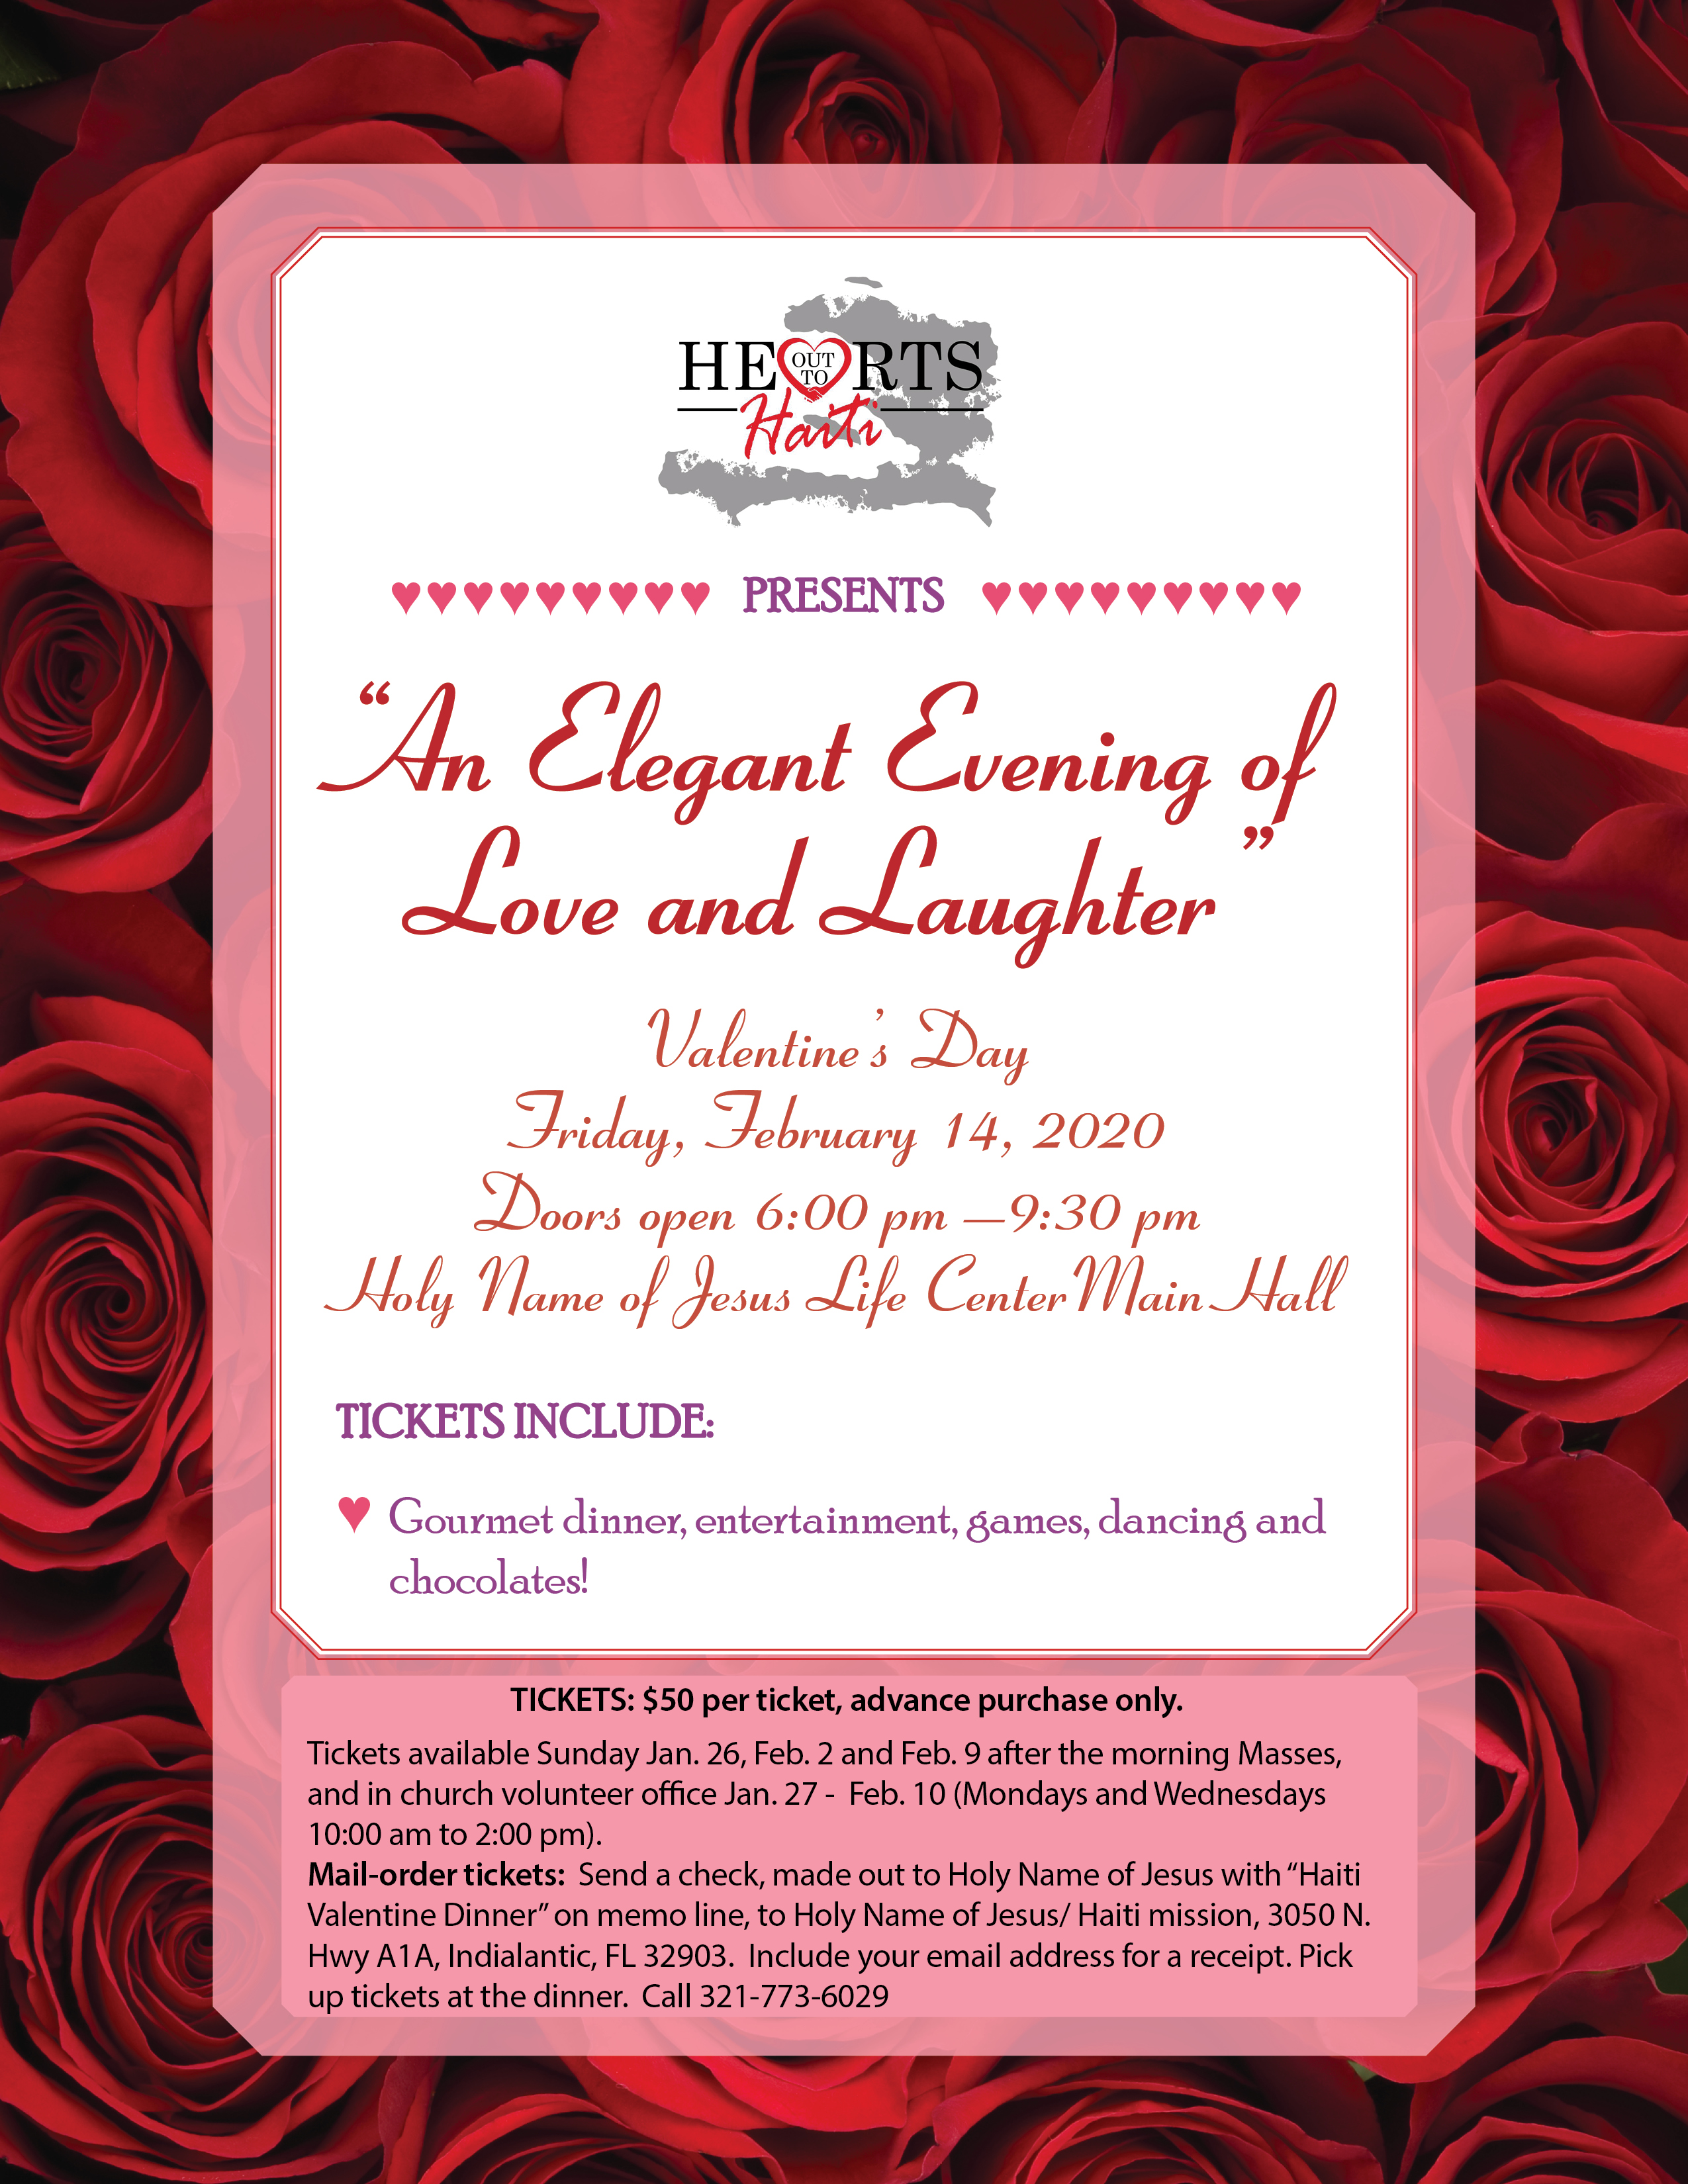 'An Elegant Evening of Love and Laughter' at Holy Name of Jesus Life Center